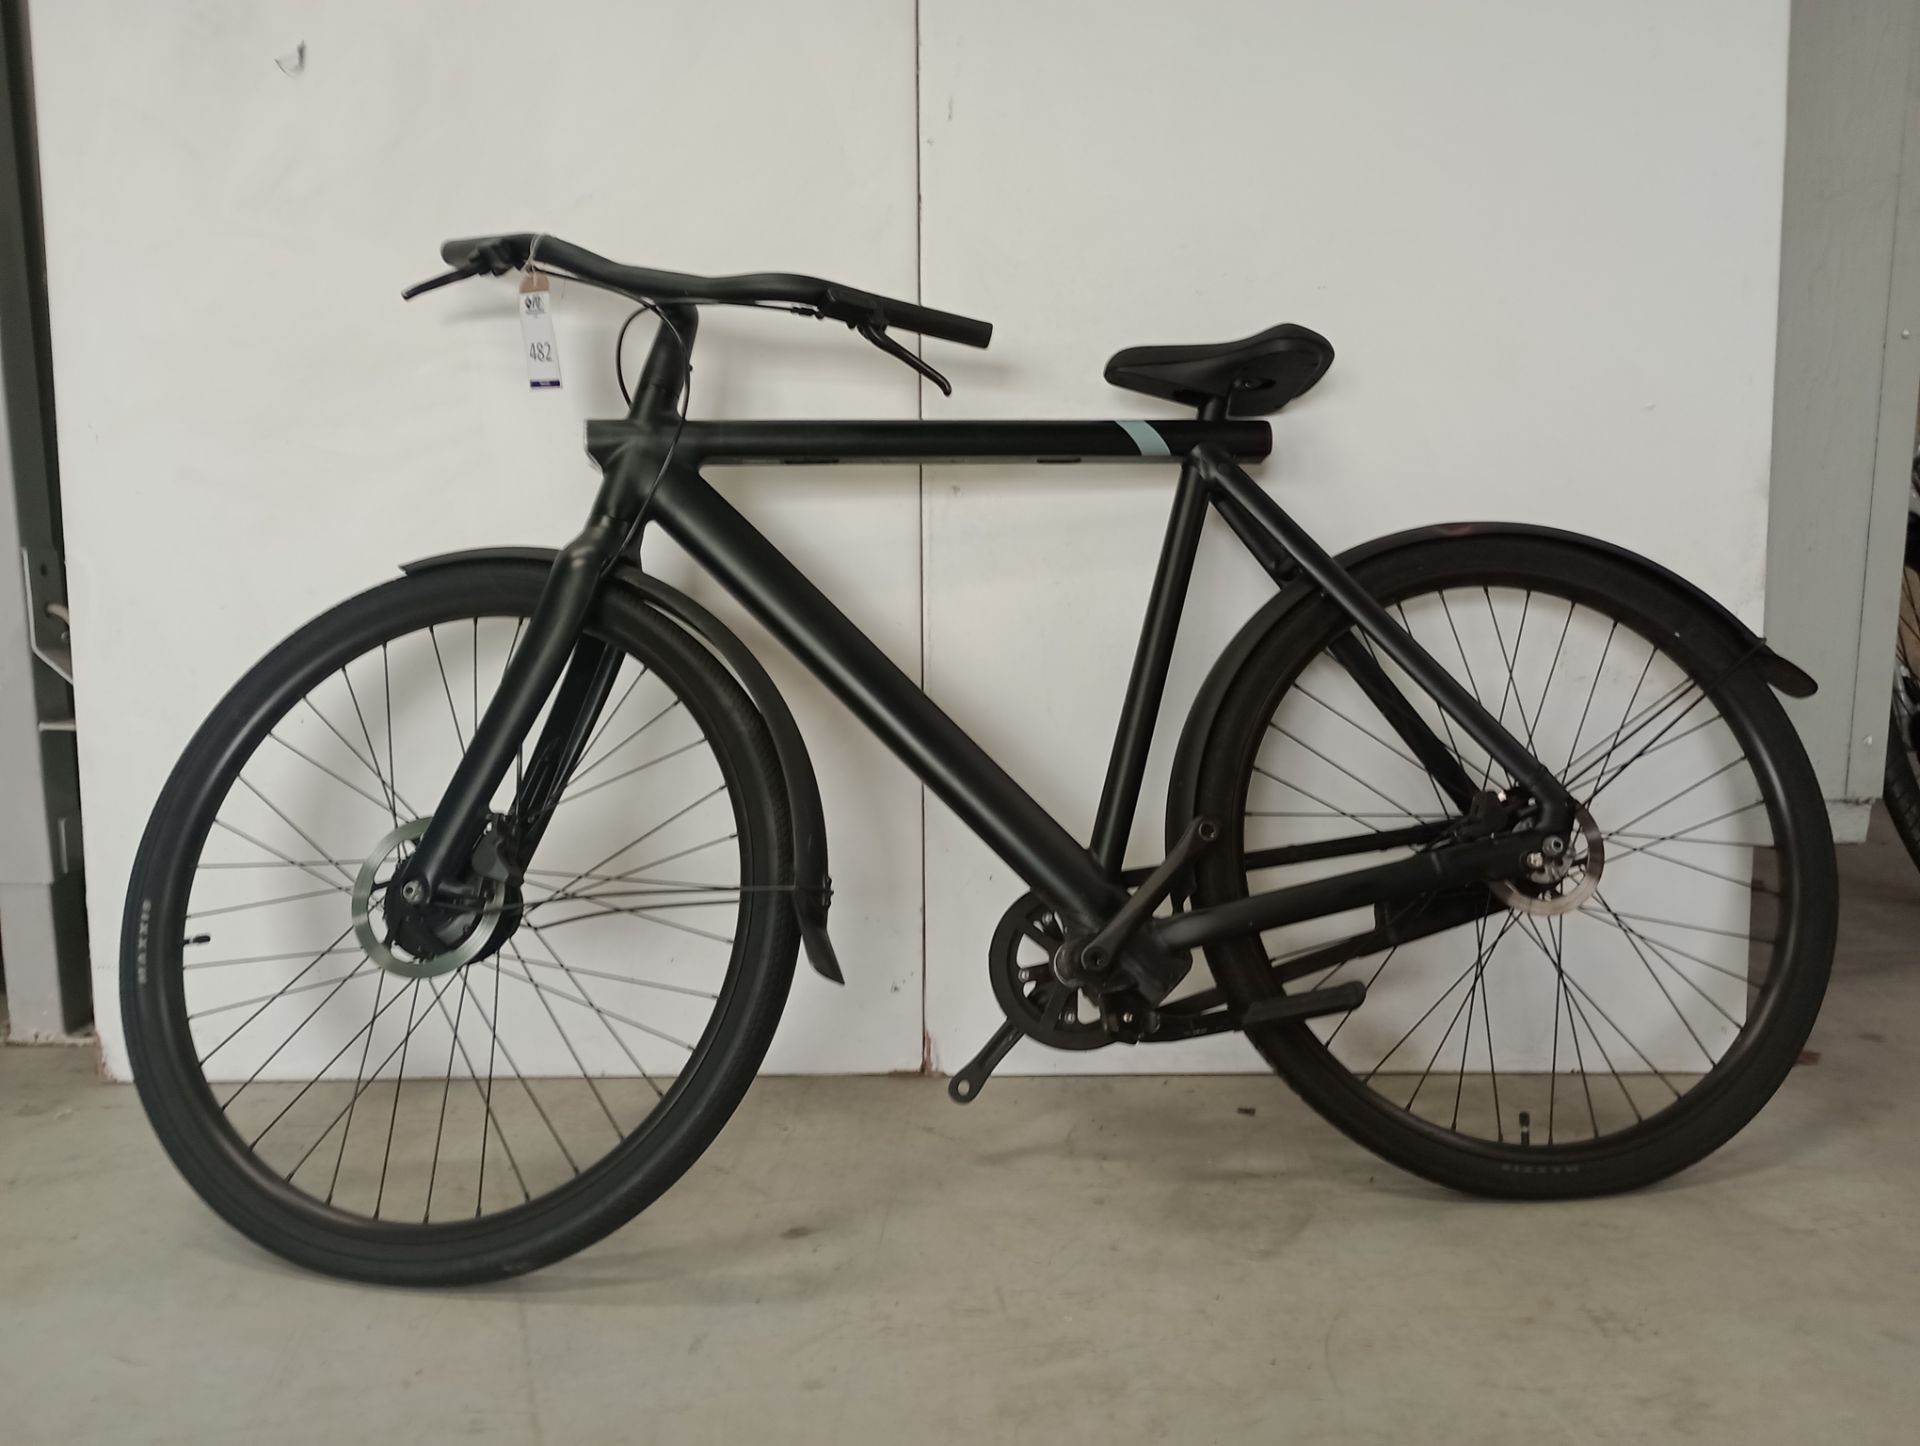 VanMoof S3 Electric Bike, Frame Number ASY3118705 (NOT ROADWORTHY - FOR SPARES ONLY) (No codes